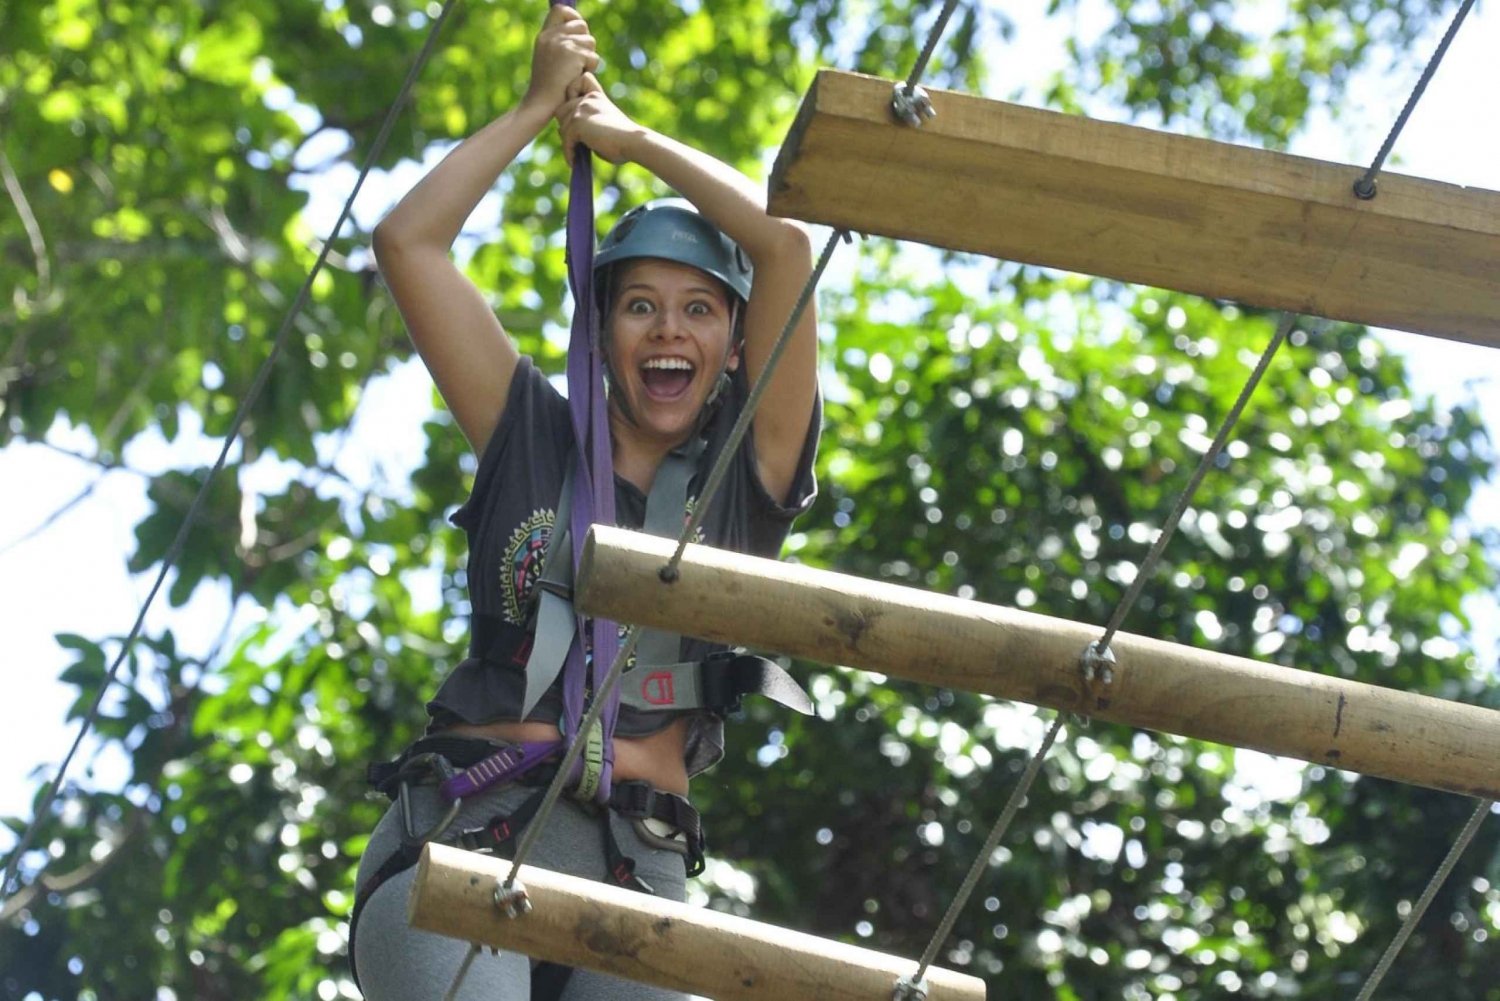 Jaco: 2-hour Adventure Canopy and High Ropes Course